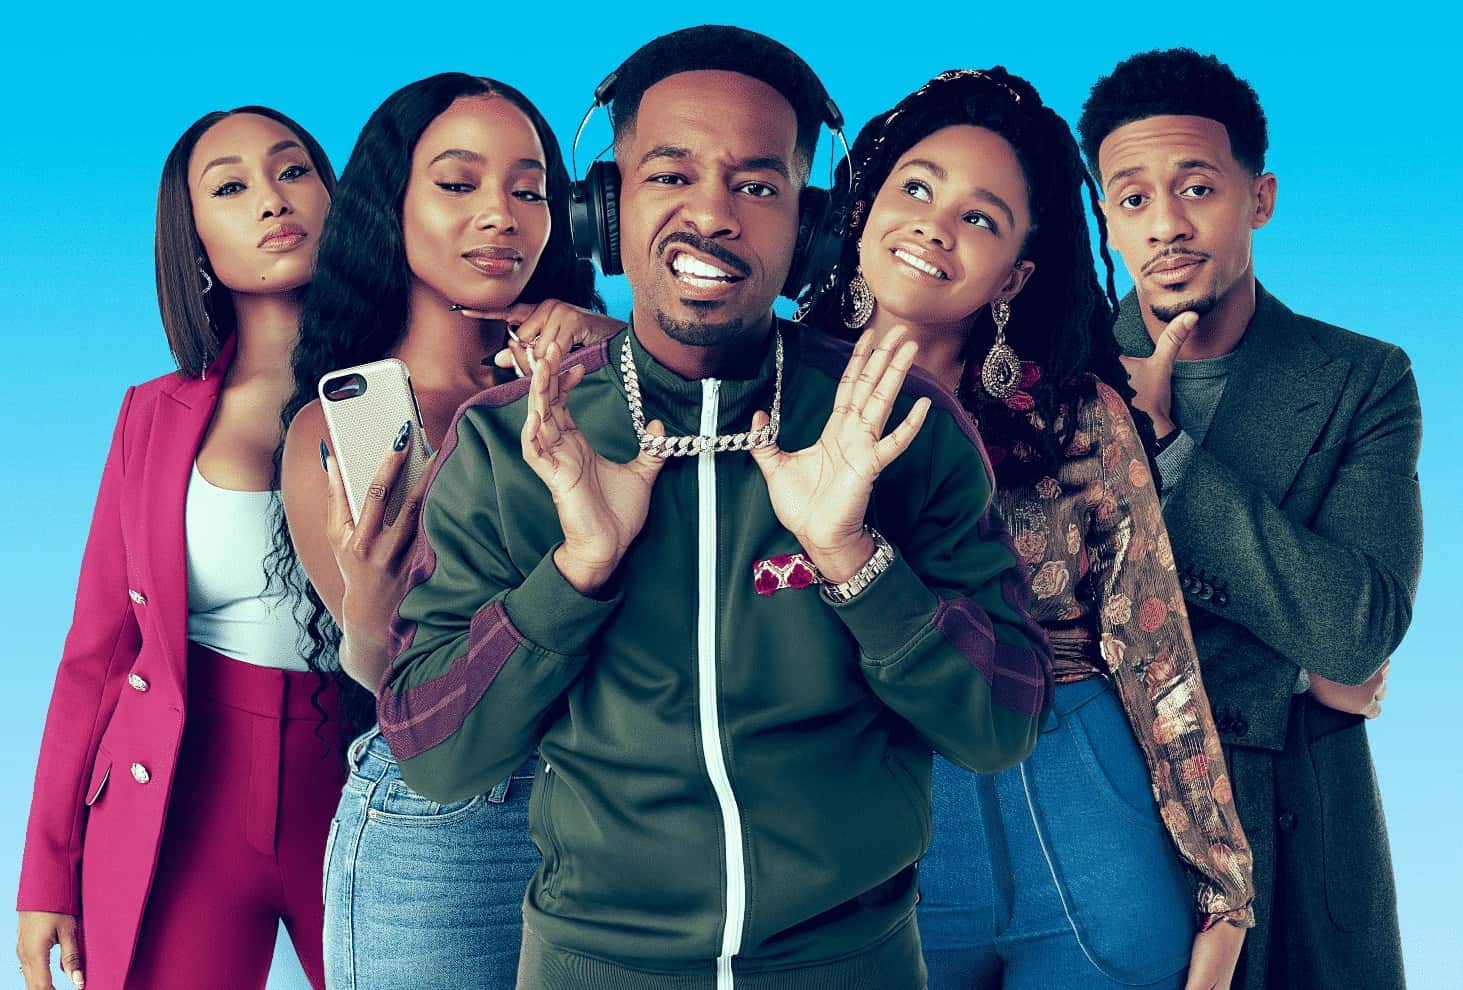 The Ride or Die 5 of BET+s Bigger | Featuring, from left to right Veronica (Angell Conwell), Tracey (Rasheda Crockett), Vince (Angell Conwell), Layne (Tanisha Long), and Deon (Chase Anthony)